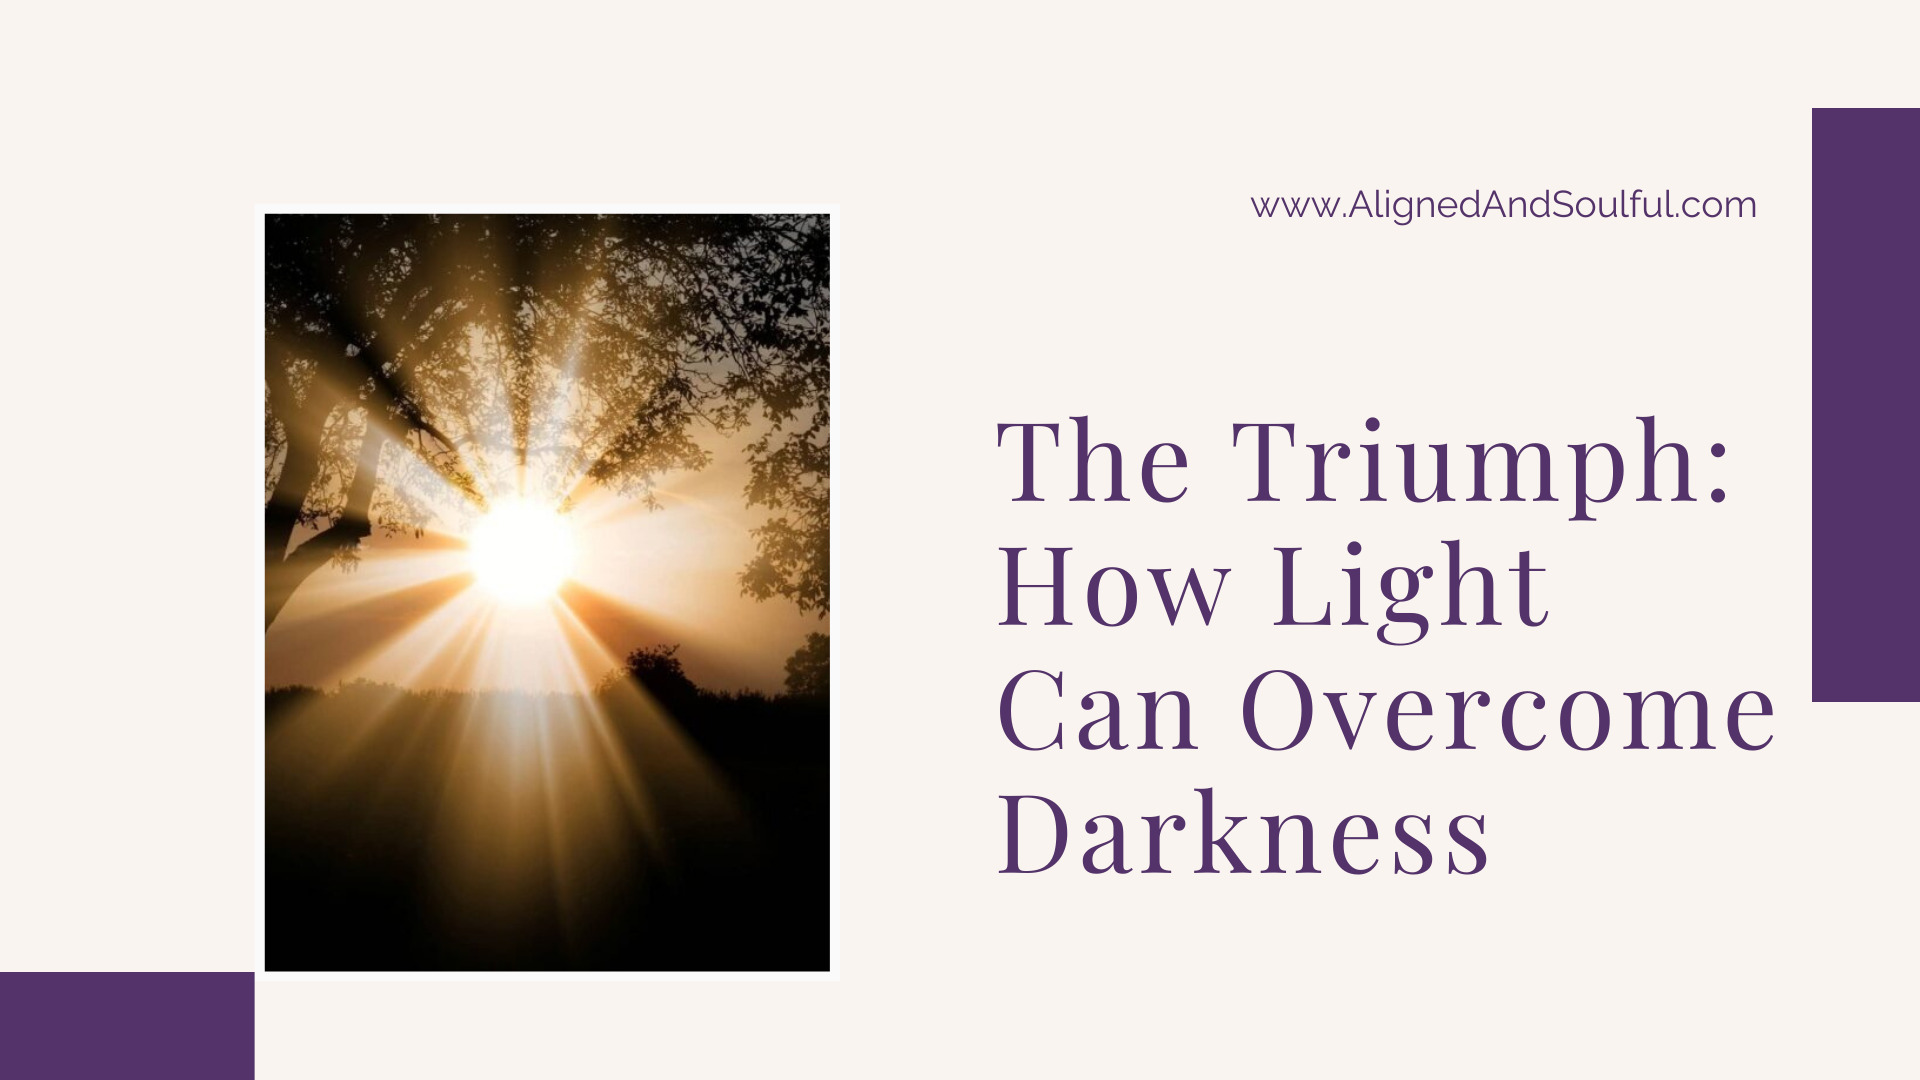 The Triumph: How Light can overcome Darkness